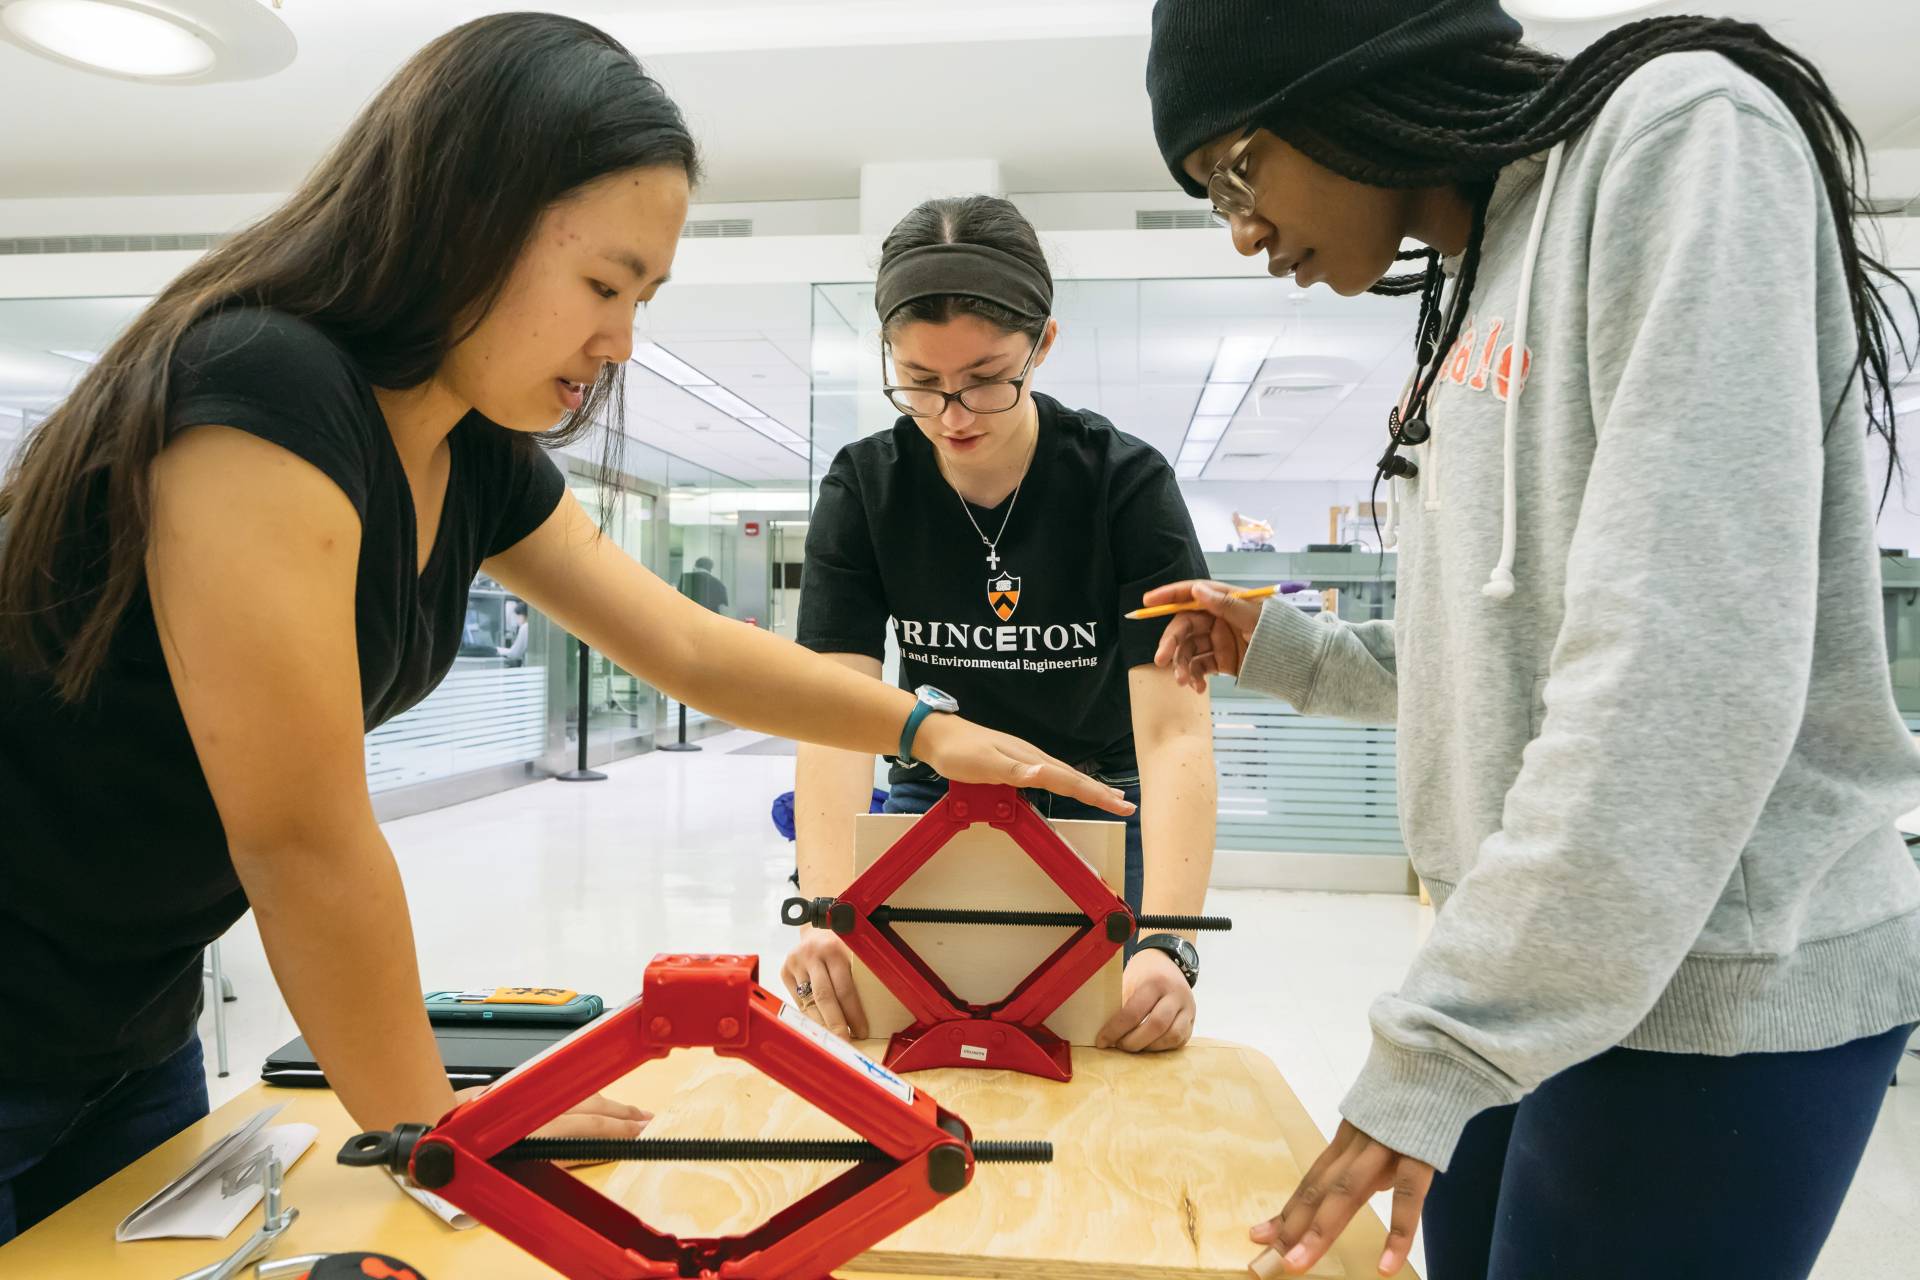 3 female students test an invention on a work table